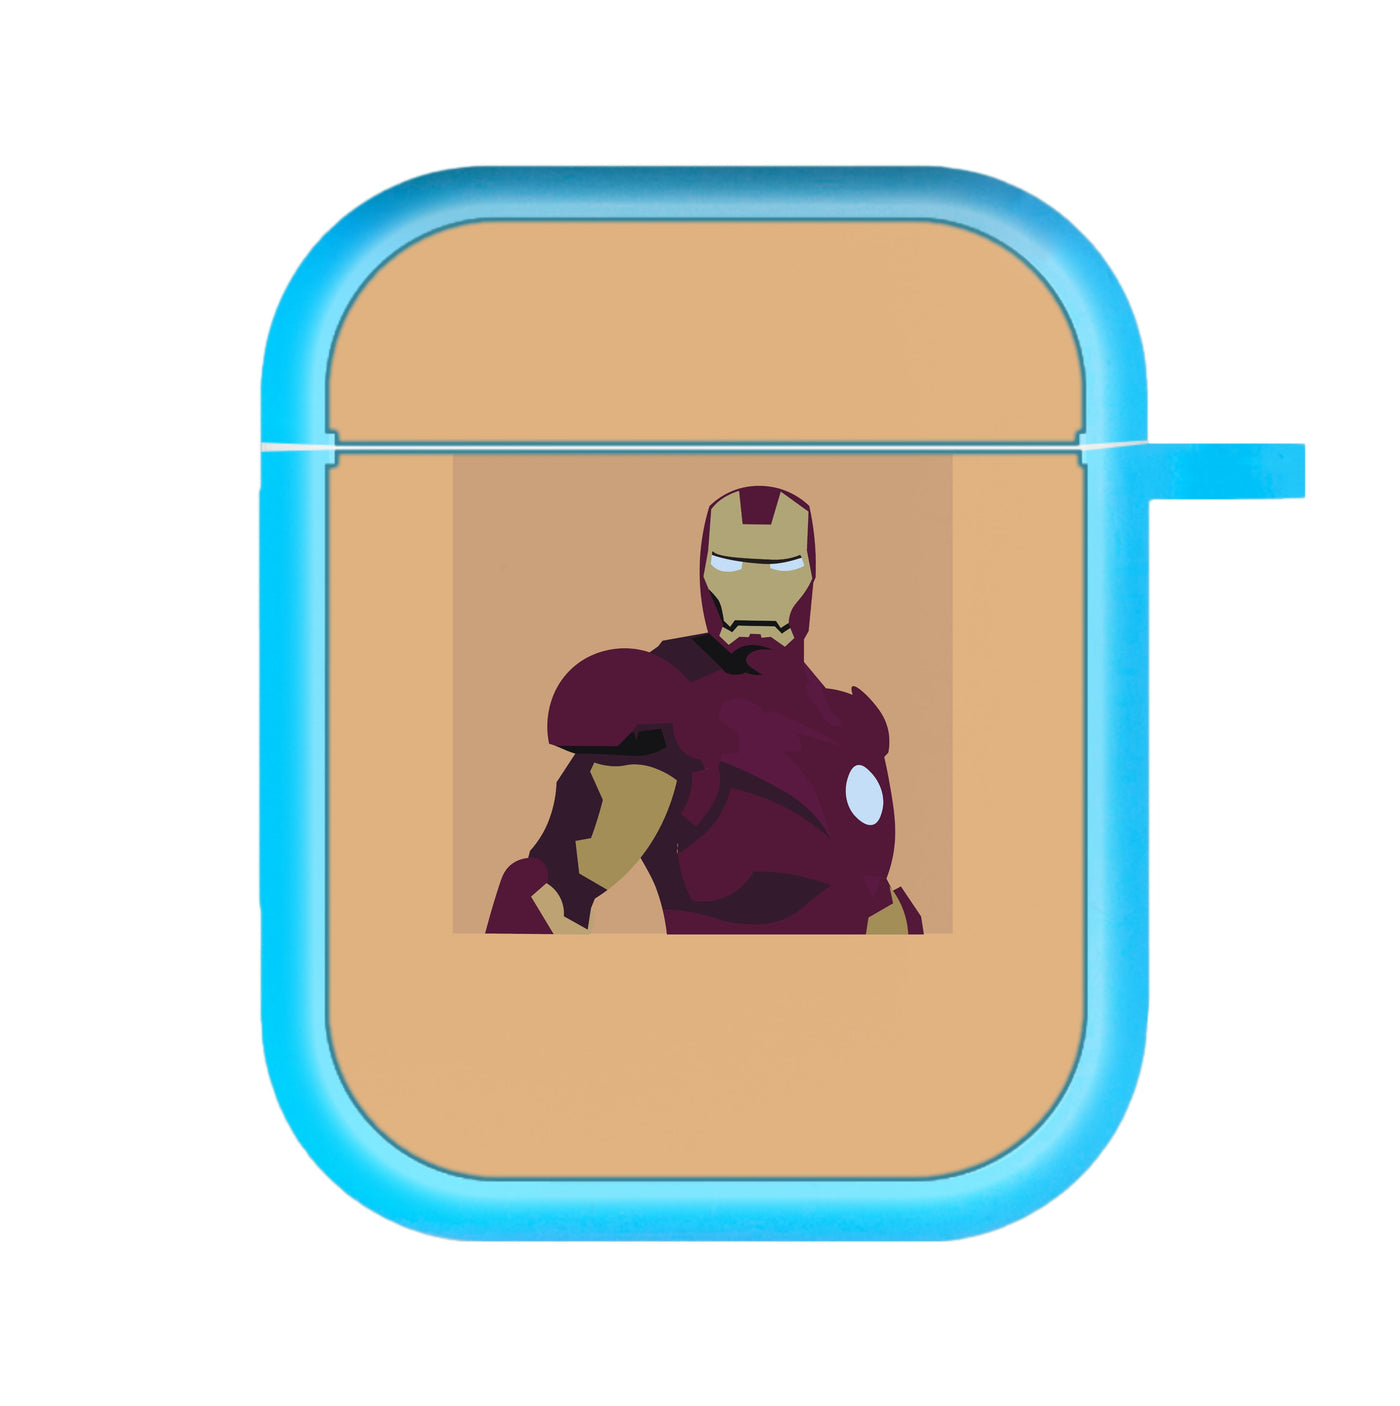 Iron man mask - Marvel AirPods Case